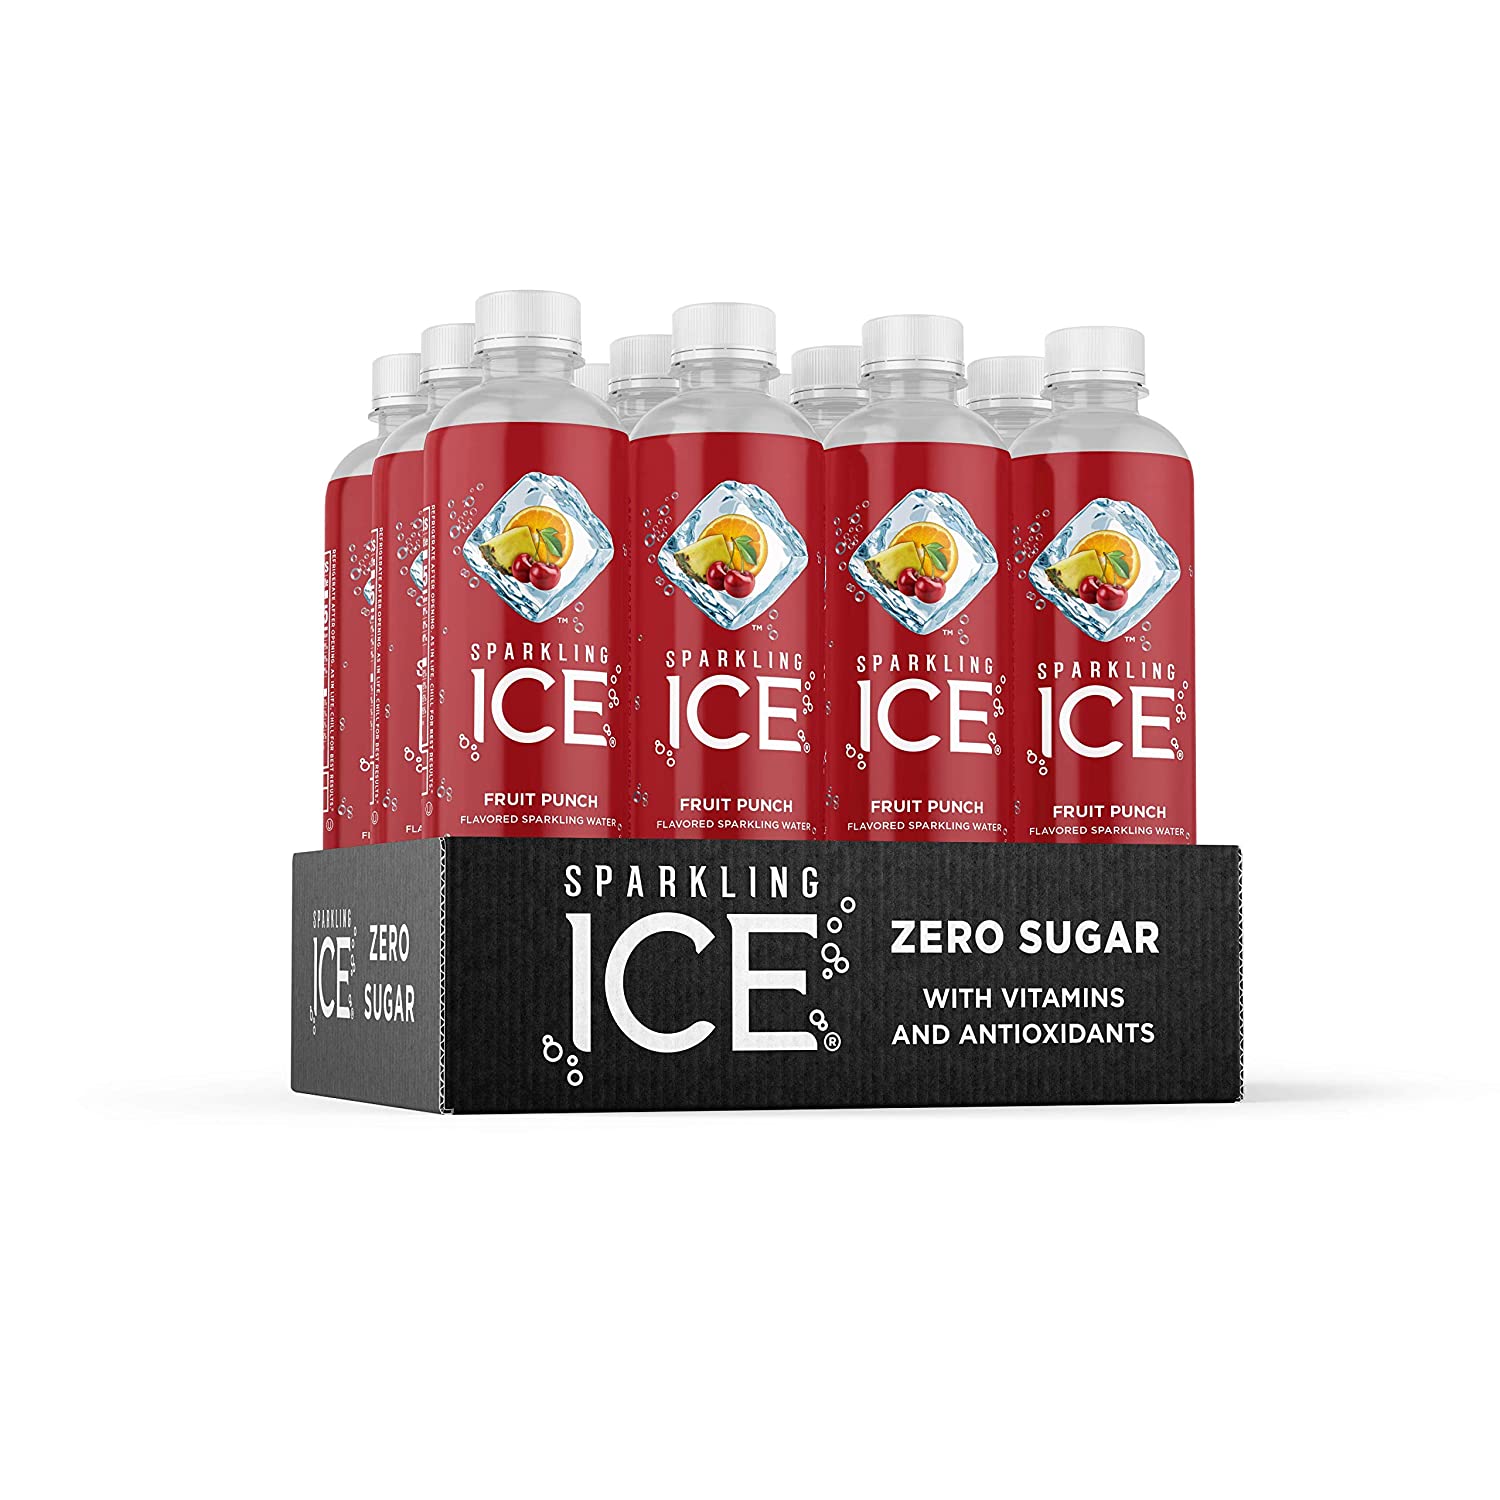 12-Pack 17-Oz Sparkling Ice Sparkling Water (Fruit Punch) $7.50 + Free Shipping w/ Prime or $25+